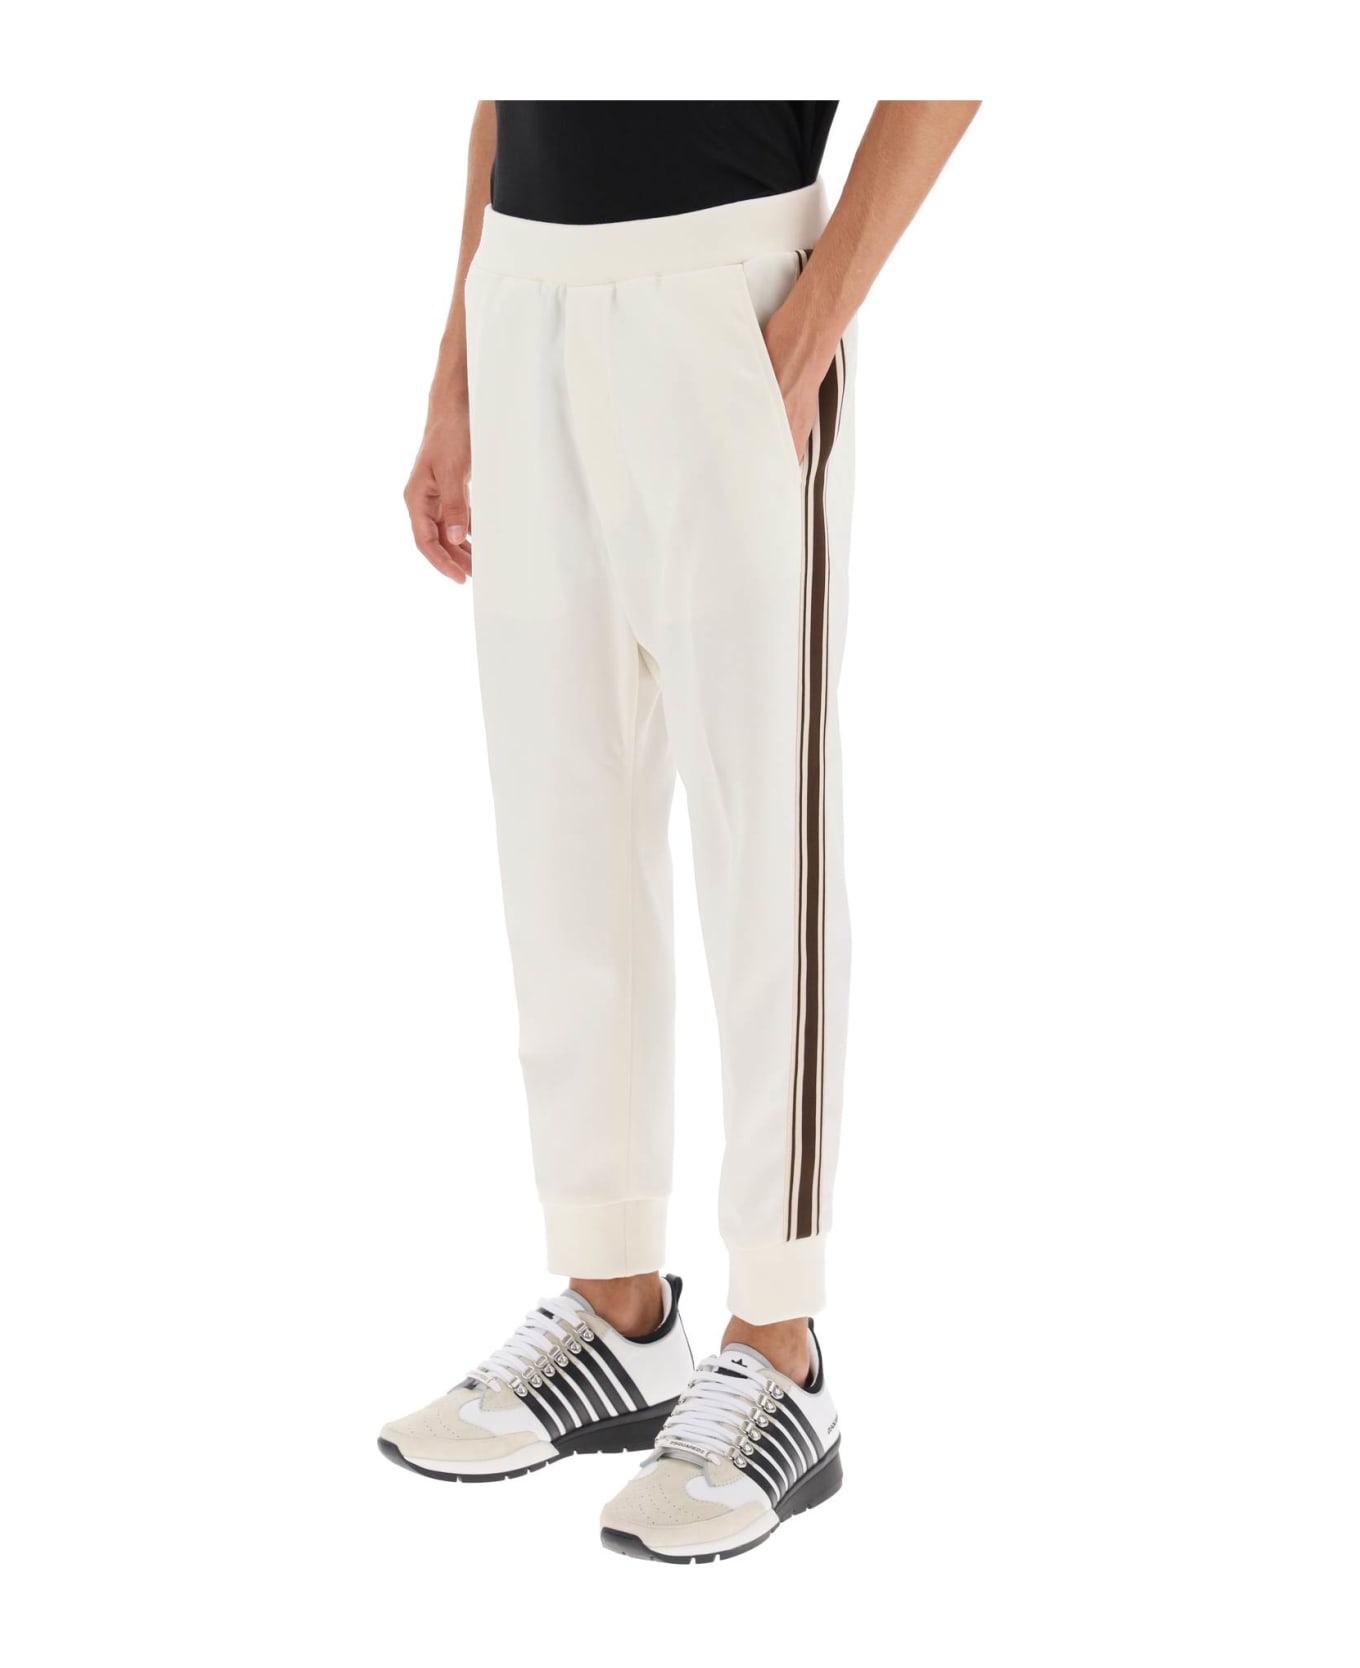 Dsquared2 Wool Blend Tailored Jog Pants - OFF WHITE (White)